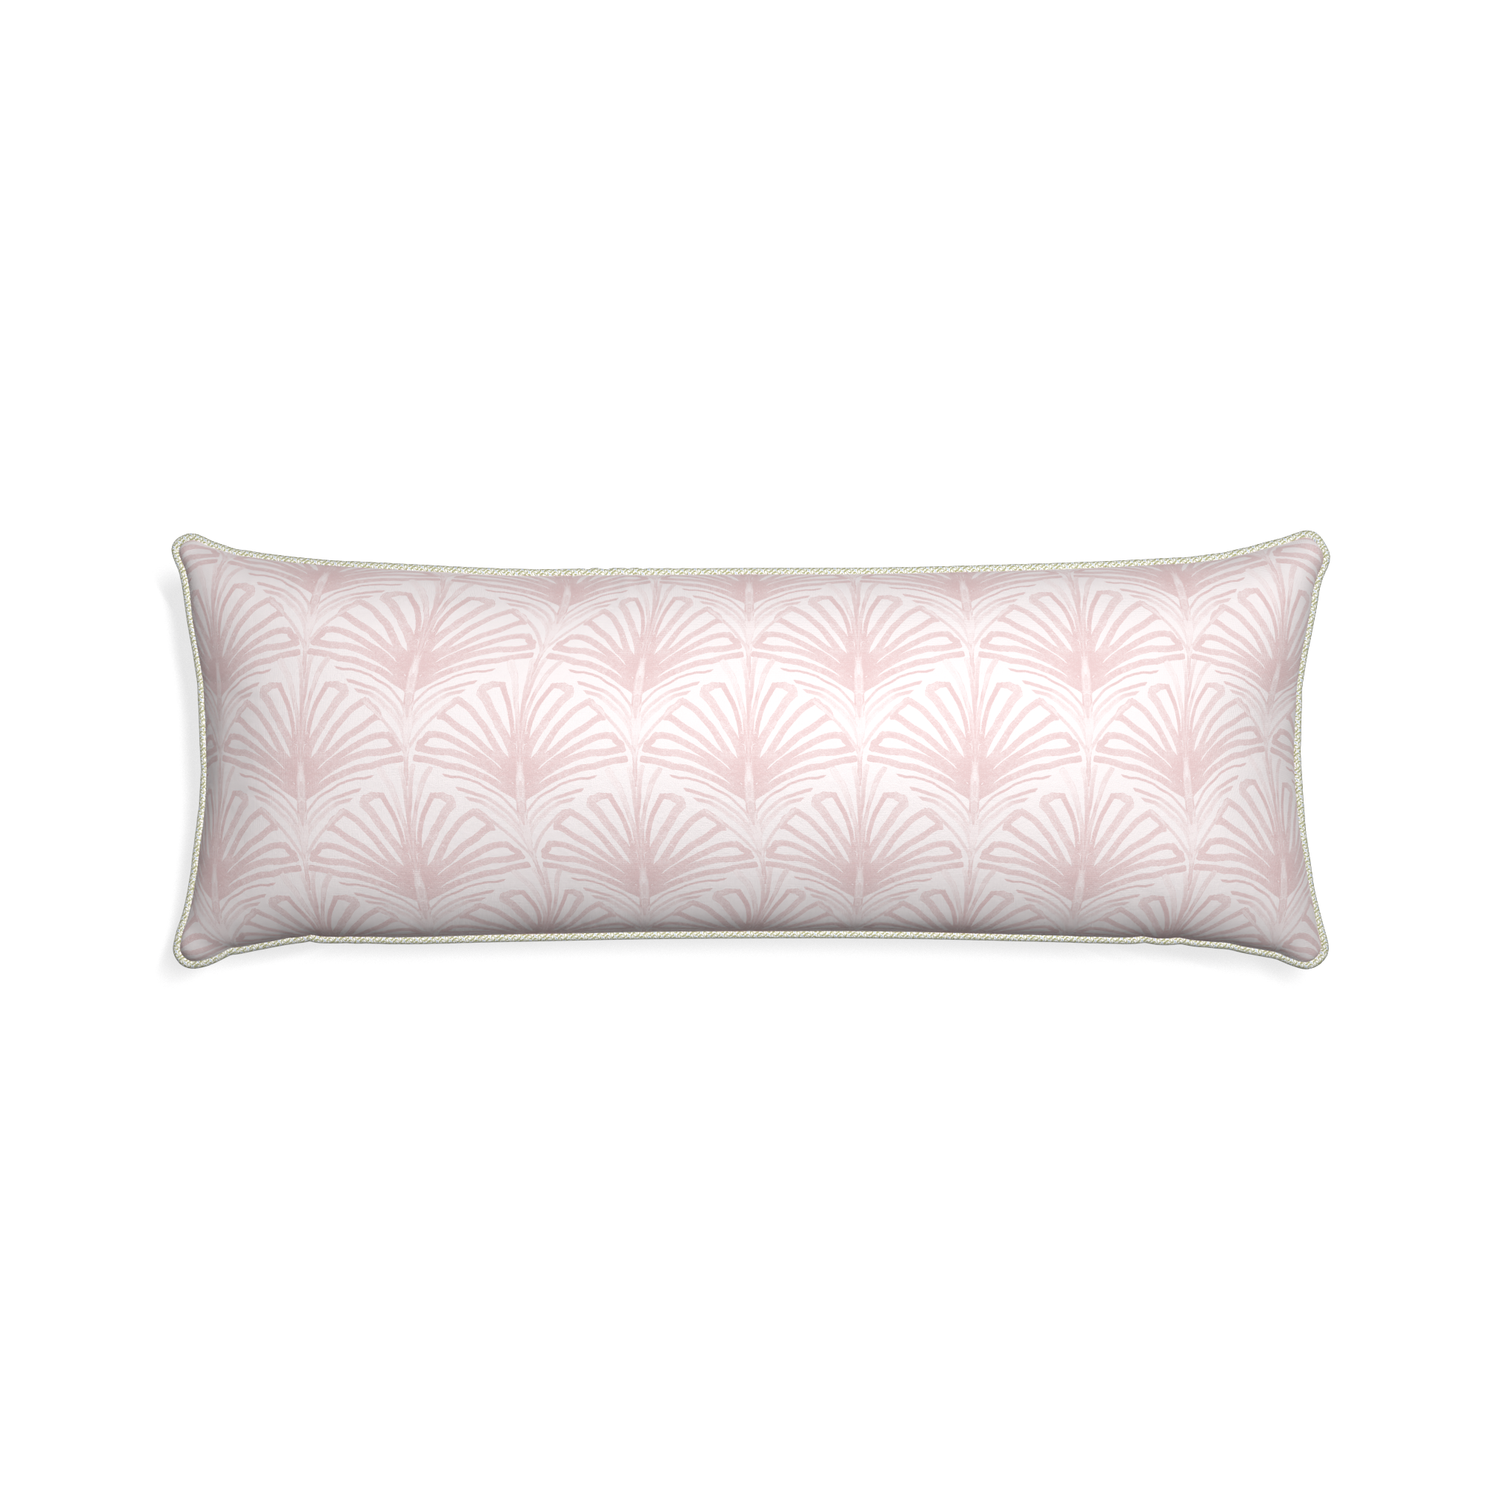 Xl-lumbar suzy rose custom pillow with l piping on white background